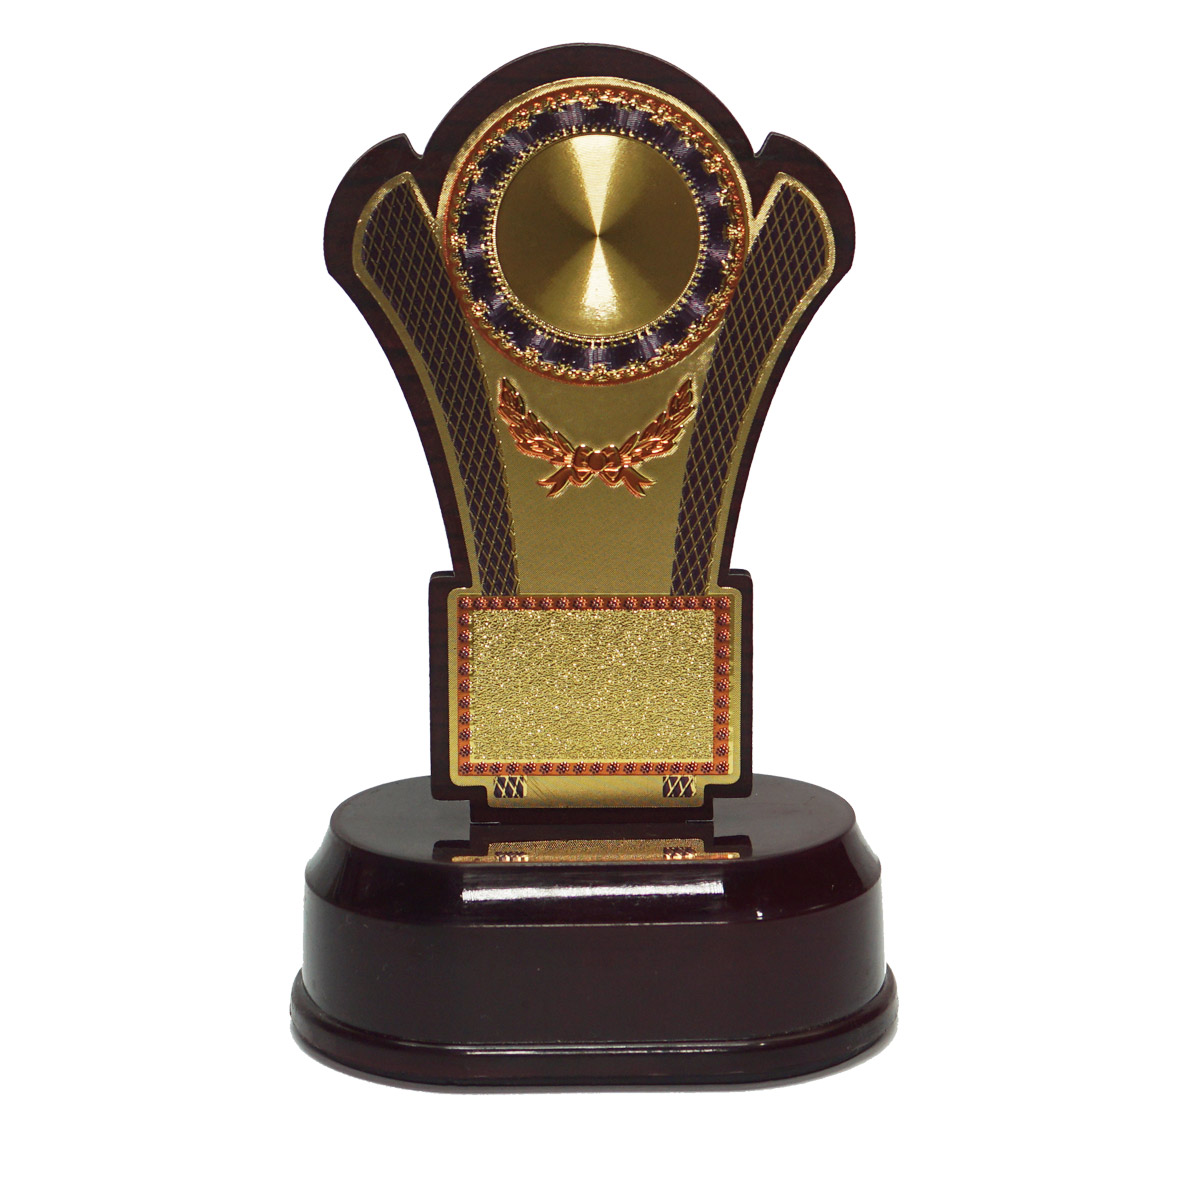 penhouse.in TP4503 Wooden Trophy 6.25 Inch With Customization SKU TP016